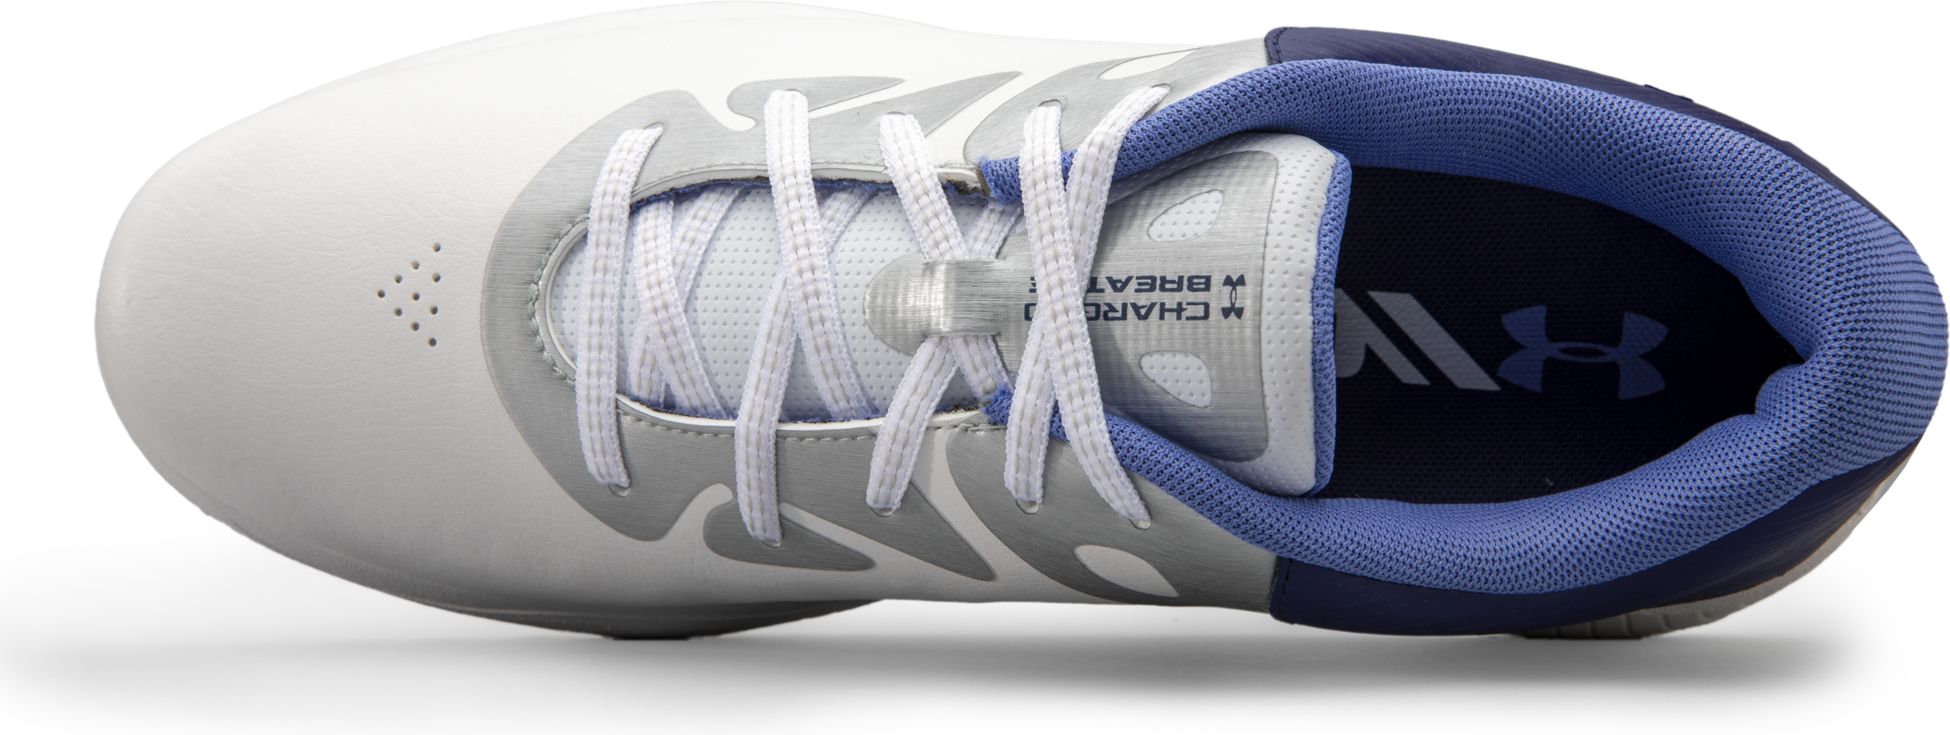 UNDER ARMOUR, W CHARGED BREATHE 2 SL